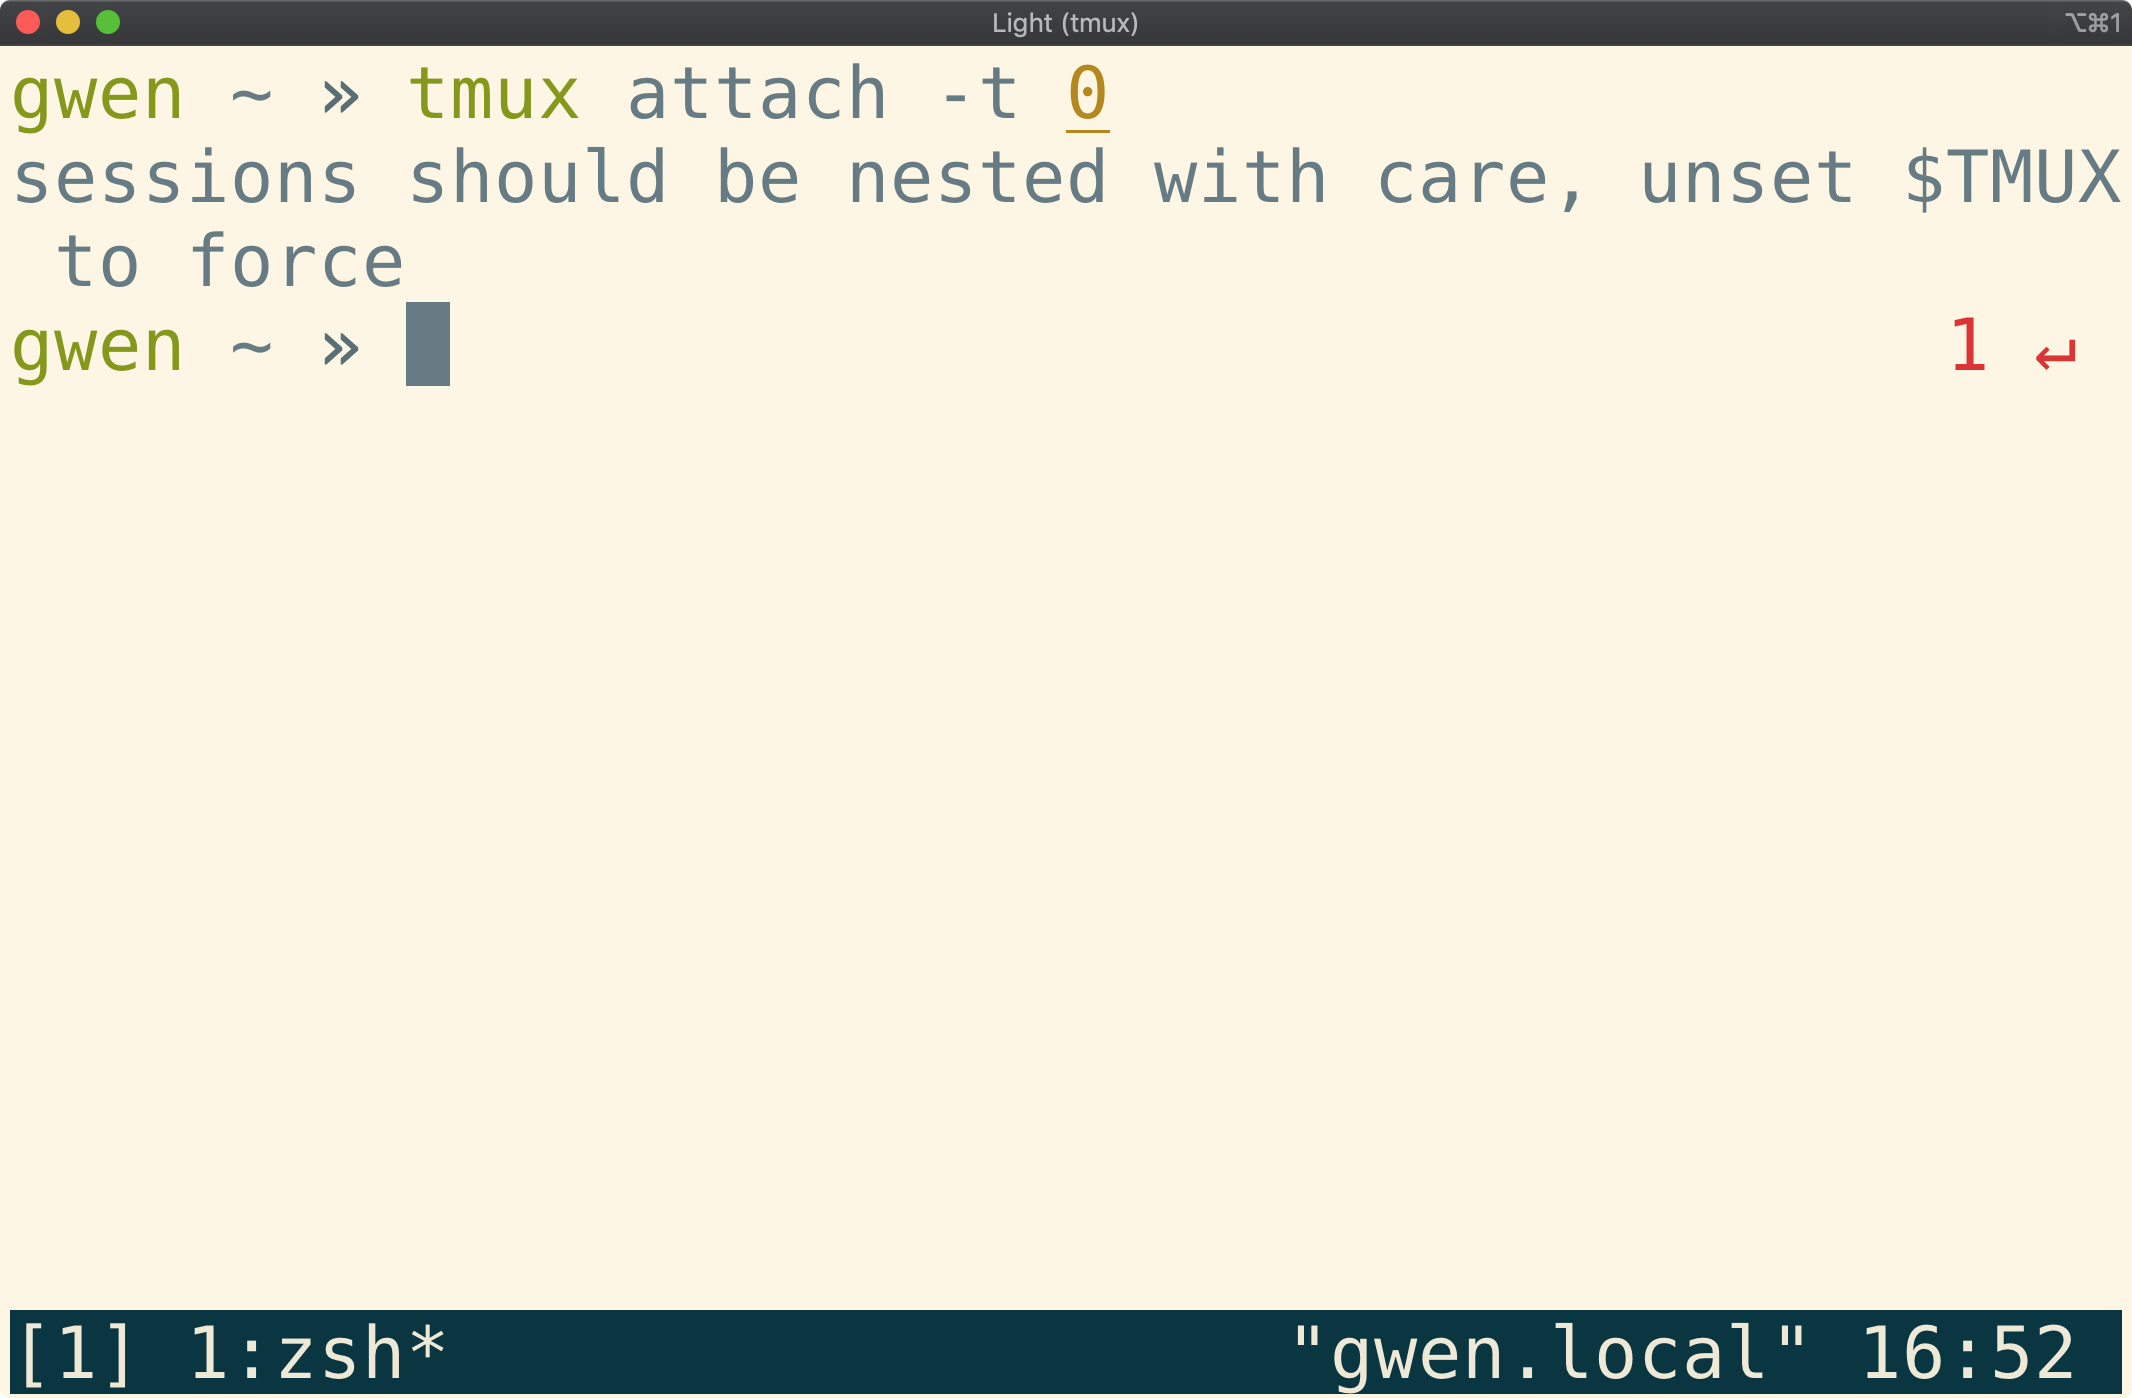 Tmux window showing error for trying to attach inside
tmux